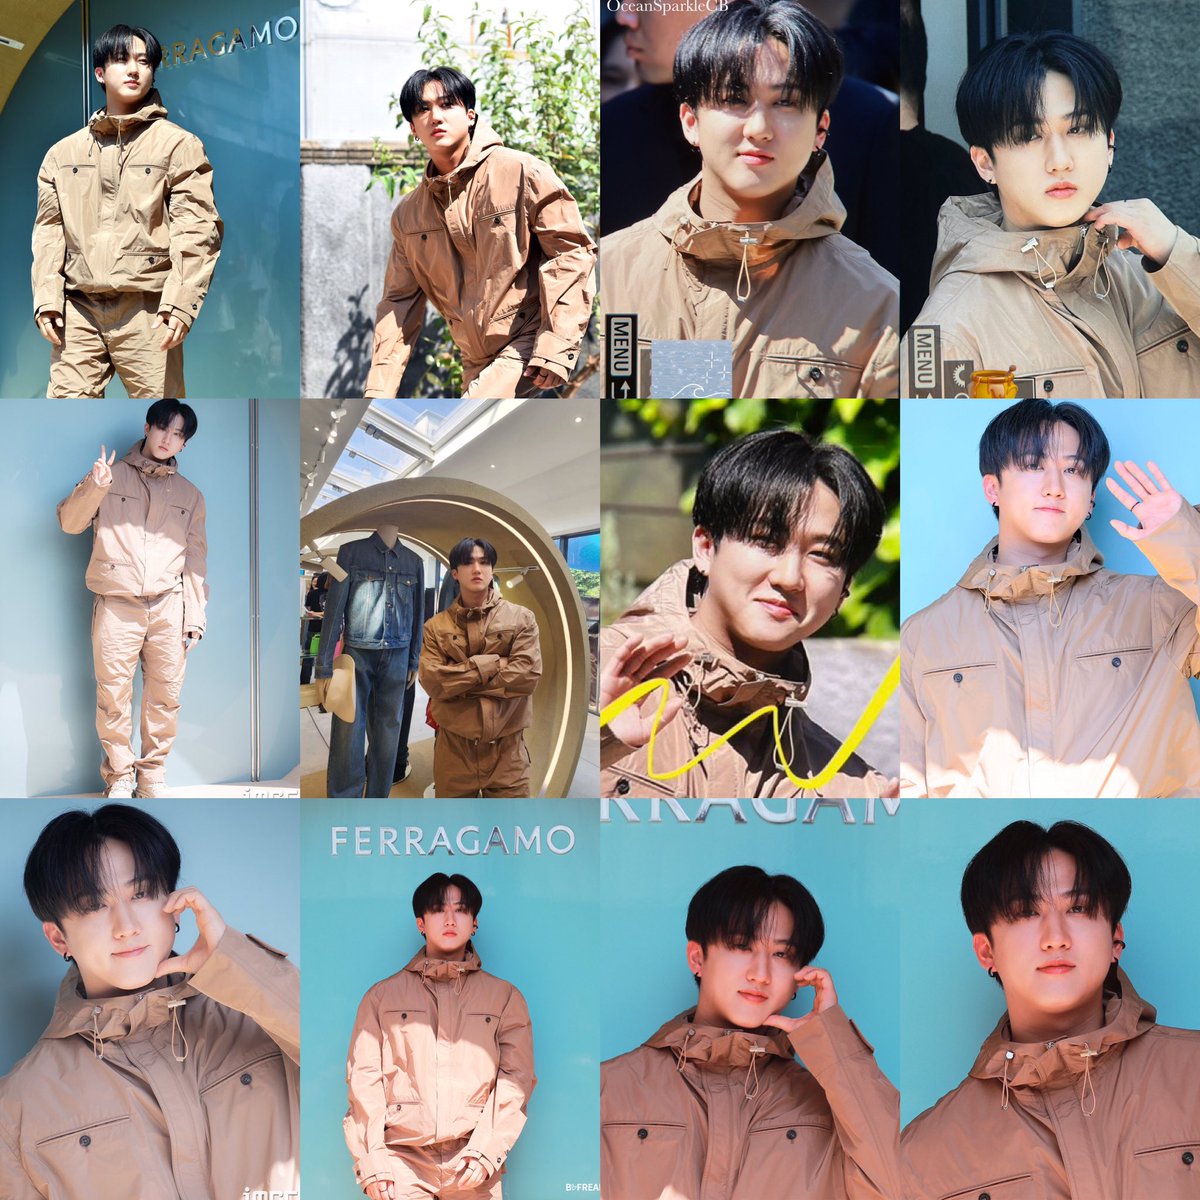 changbin’s iconic and viral moments 2023

january - omg “eomma eomma” 
february - samsung jutdae ad
march - chili chili crab crab song🕺
april - love me like this challenge
may - changbin playing billiard 
june - changbin at the ferragamo 2023 pre fall collection event [new]